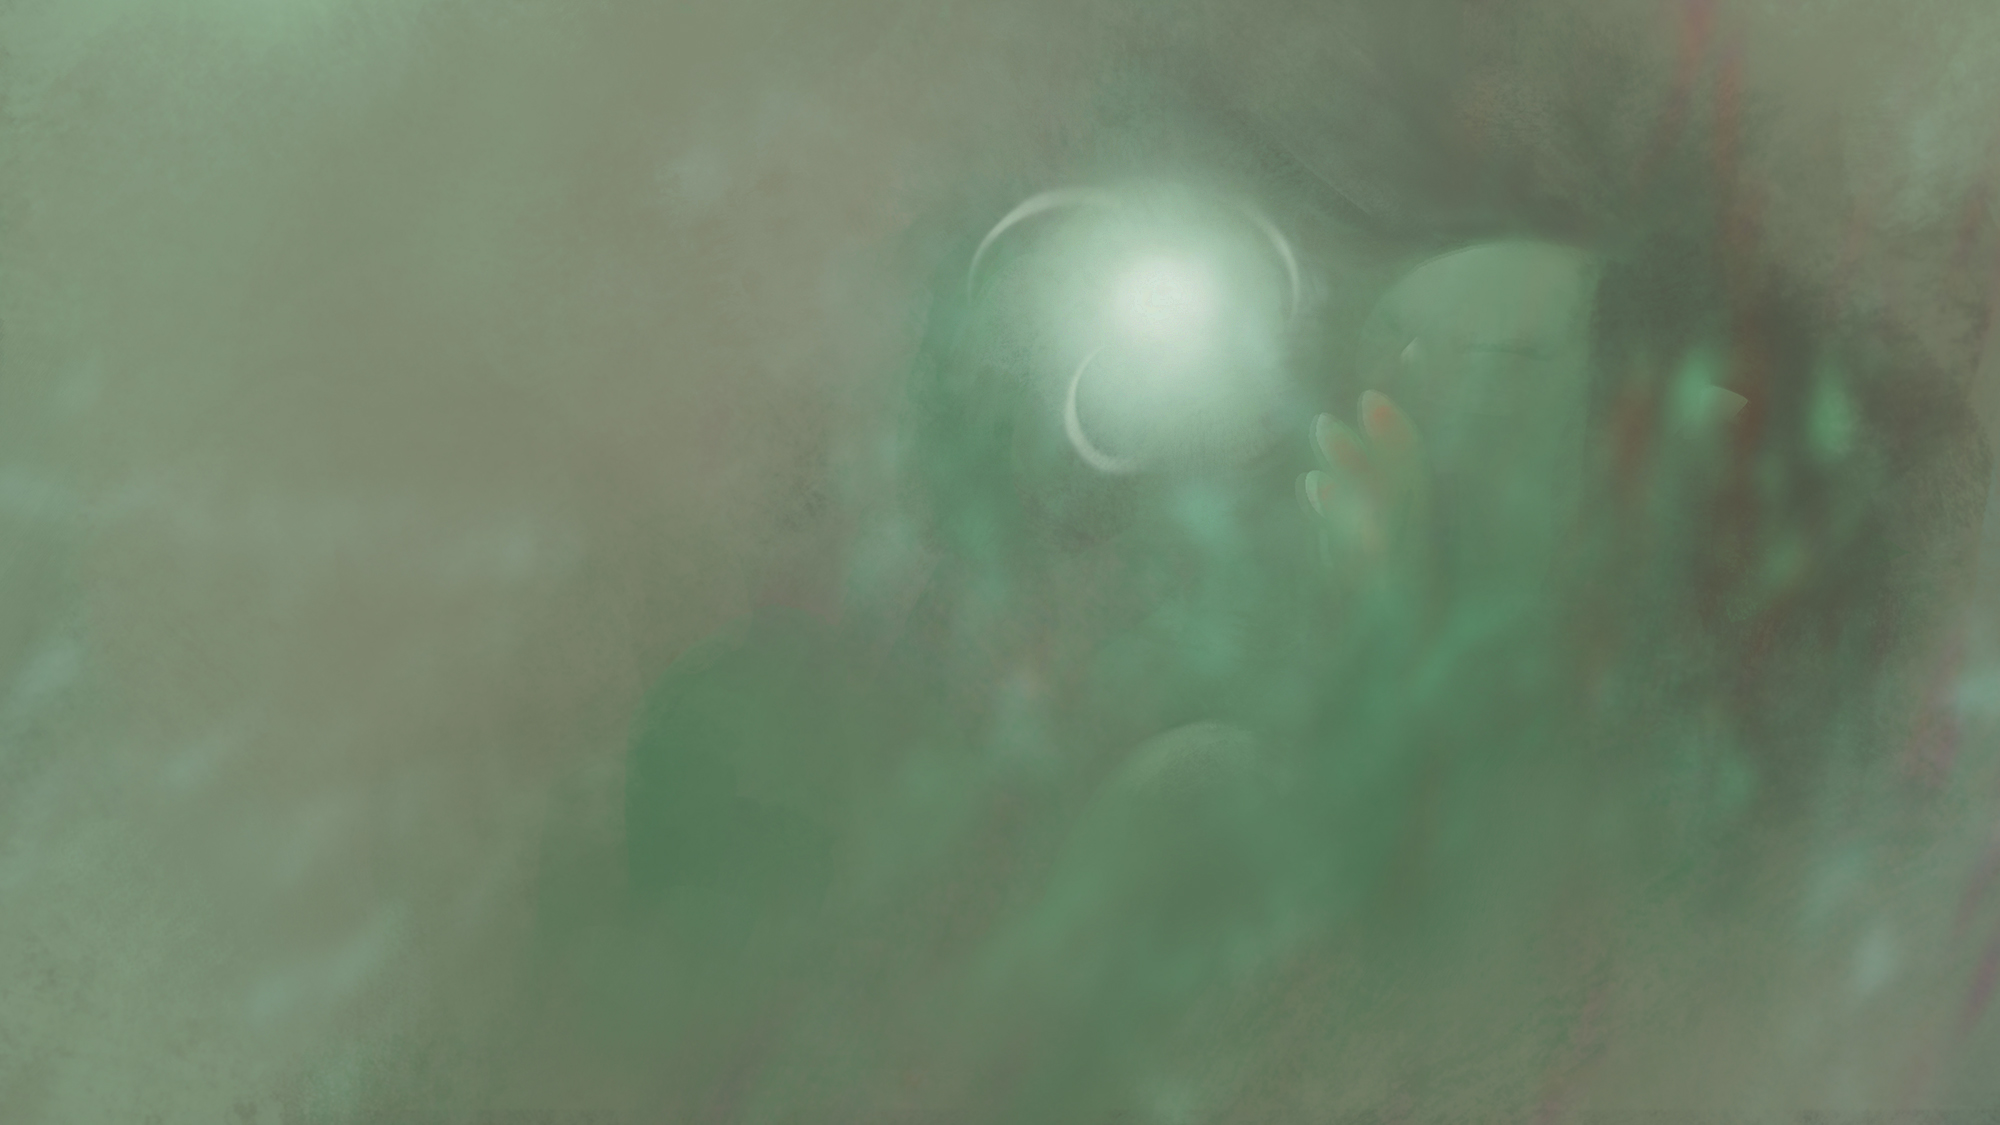 green painting with green baby reaching out to white glowing orb